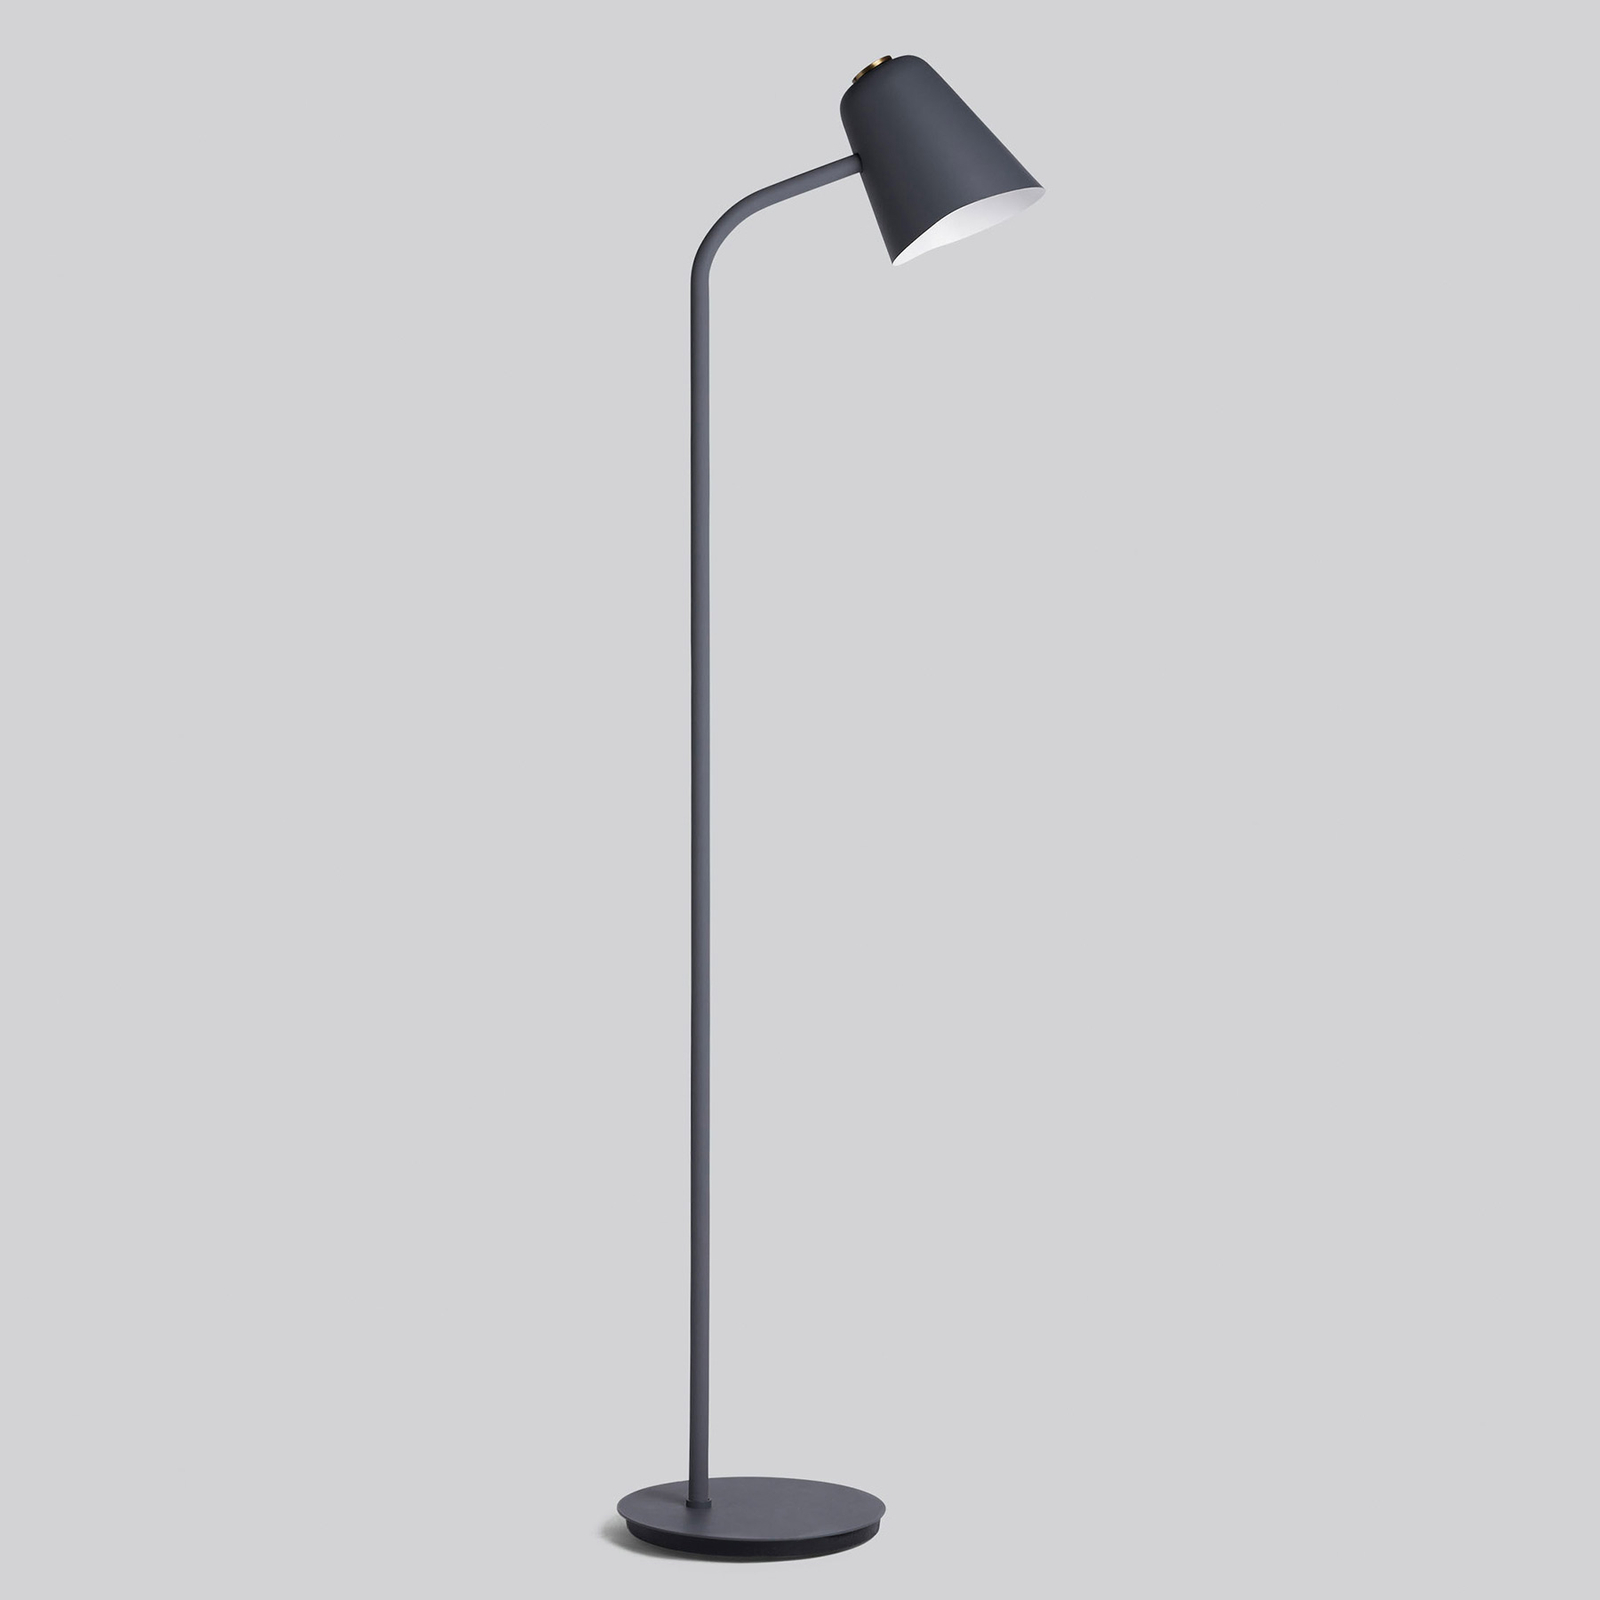 Northern Me dim lampadaire LED dimmable gris